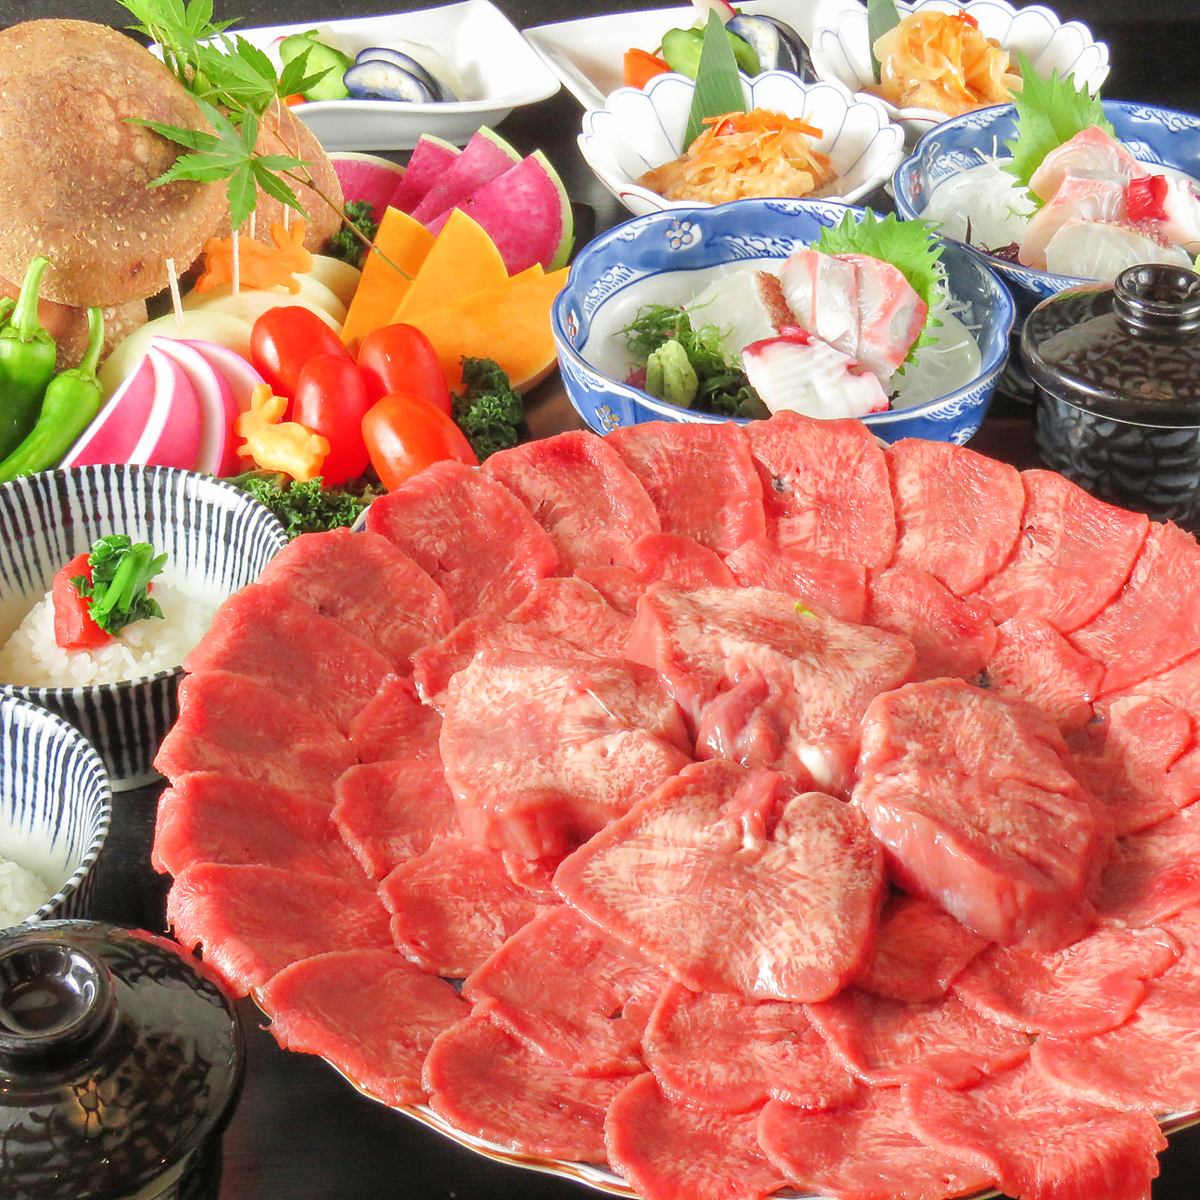 Courses where you can enjoy exquisite Neme beef in a private room are available from 5,500 yen (tax included)